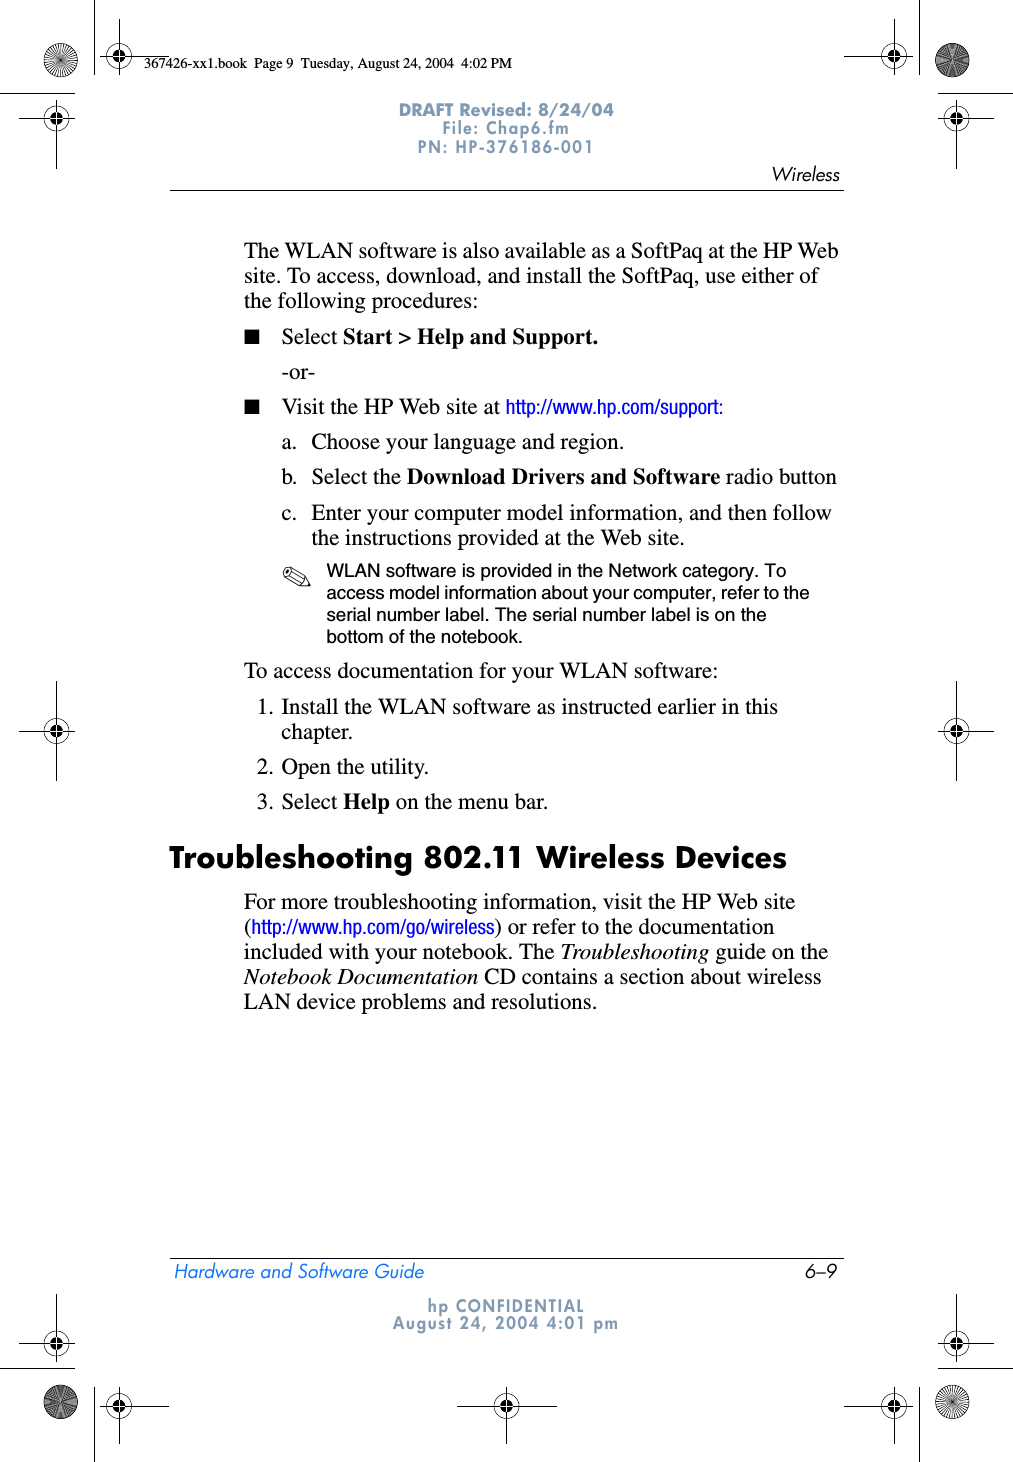 WirelessHardware and Software Guide 6–9DRAFT Revised: 8/24/04File: Chap6.fm PN: HP-376186-001 hp CONFIDENTIALAugust 24, 2004 4:01 pmThe WLAN software is also available as a SoftPaq at the HP Web site. To access, download, and install the SoftPaq, use either of the following procedures:■Select Start &gt; Help and Support.-or-■Visit the HP Web site at http://www.hp.com/support:a. Choose your language and region.b. Select the Download Drivers and Software radio buttonc. Enter your computer model information, and then follow the instructions provided at the Web site. ✎WLAN software is provided in the Network category. To access model information about your computer, refer to the serial number label. The serial number label is on the bottom of the notebook.To access documentation for your WLAN software:1. Install the WLAN software as instructed earlier in this chapter.2. Open the utility.3. Select Help on the menu bar.Troubleshooting 802.11 Wireless DevicesFor more troubleshooting information, visit the HP Web site (http://www.hp.com/go/wireless) or refer to the documentation included with your notebook. The Troubleshooting guide on the Notebook Documentation CD contains a section about wireless LAN device problems and resolutions.367426-xx1.book  Page 9  Tuesday, August 24, 2004  4:02 PM